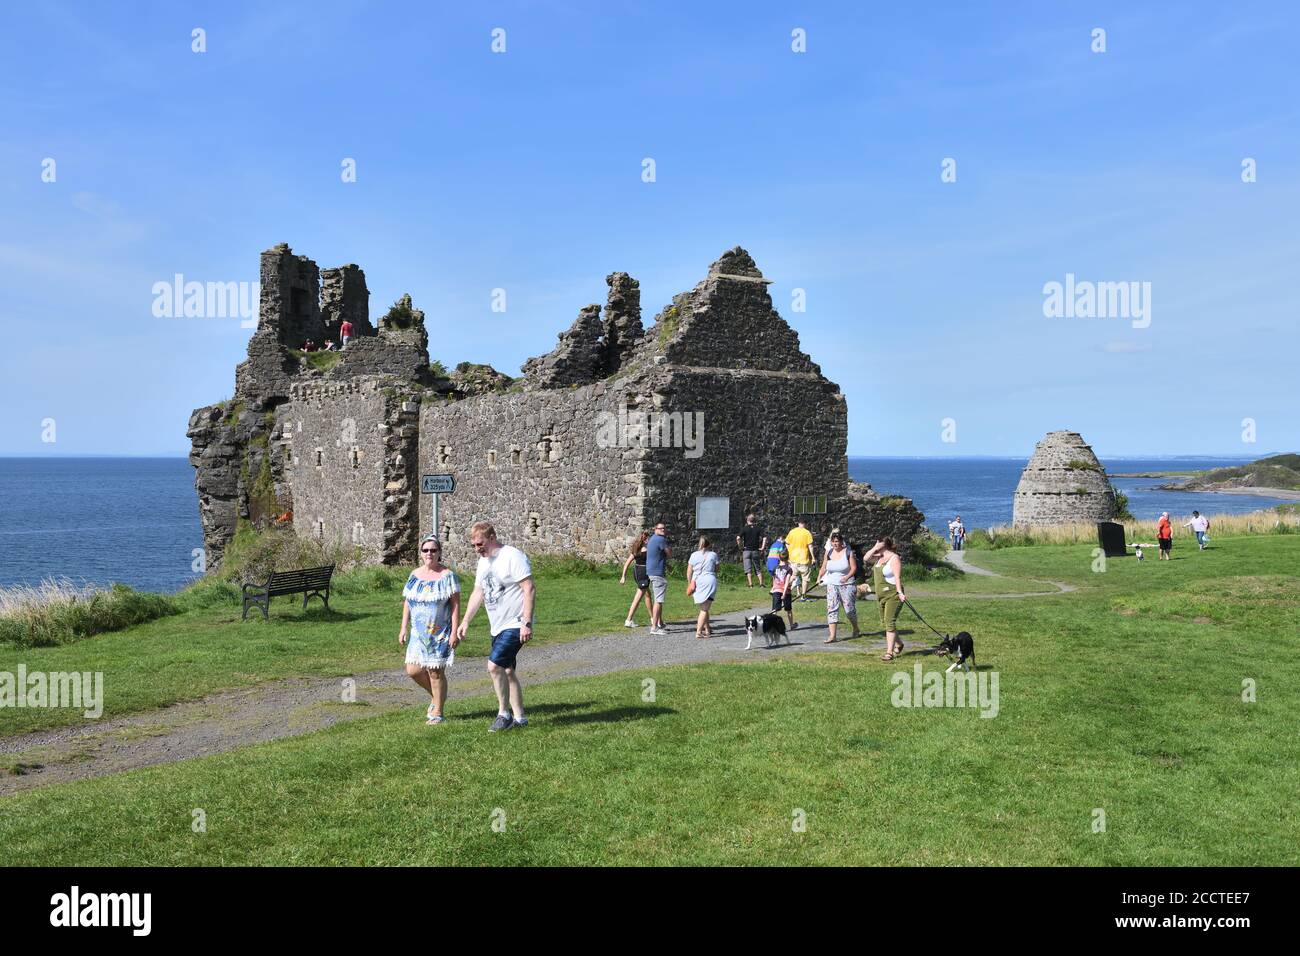 People enjoy a warm sunny day as lockdown eases at 13th century built Dunure Castle on the Firth of Clyde, Ayrshire, Scotland, UK, Europe Stock Photo